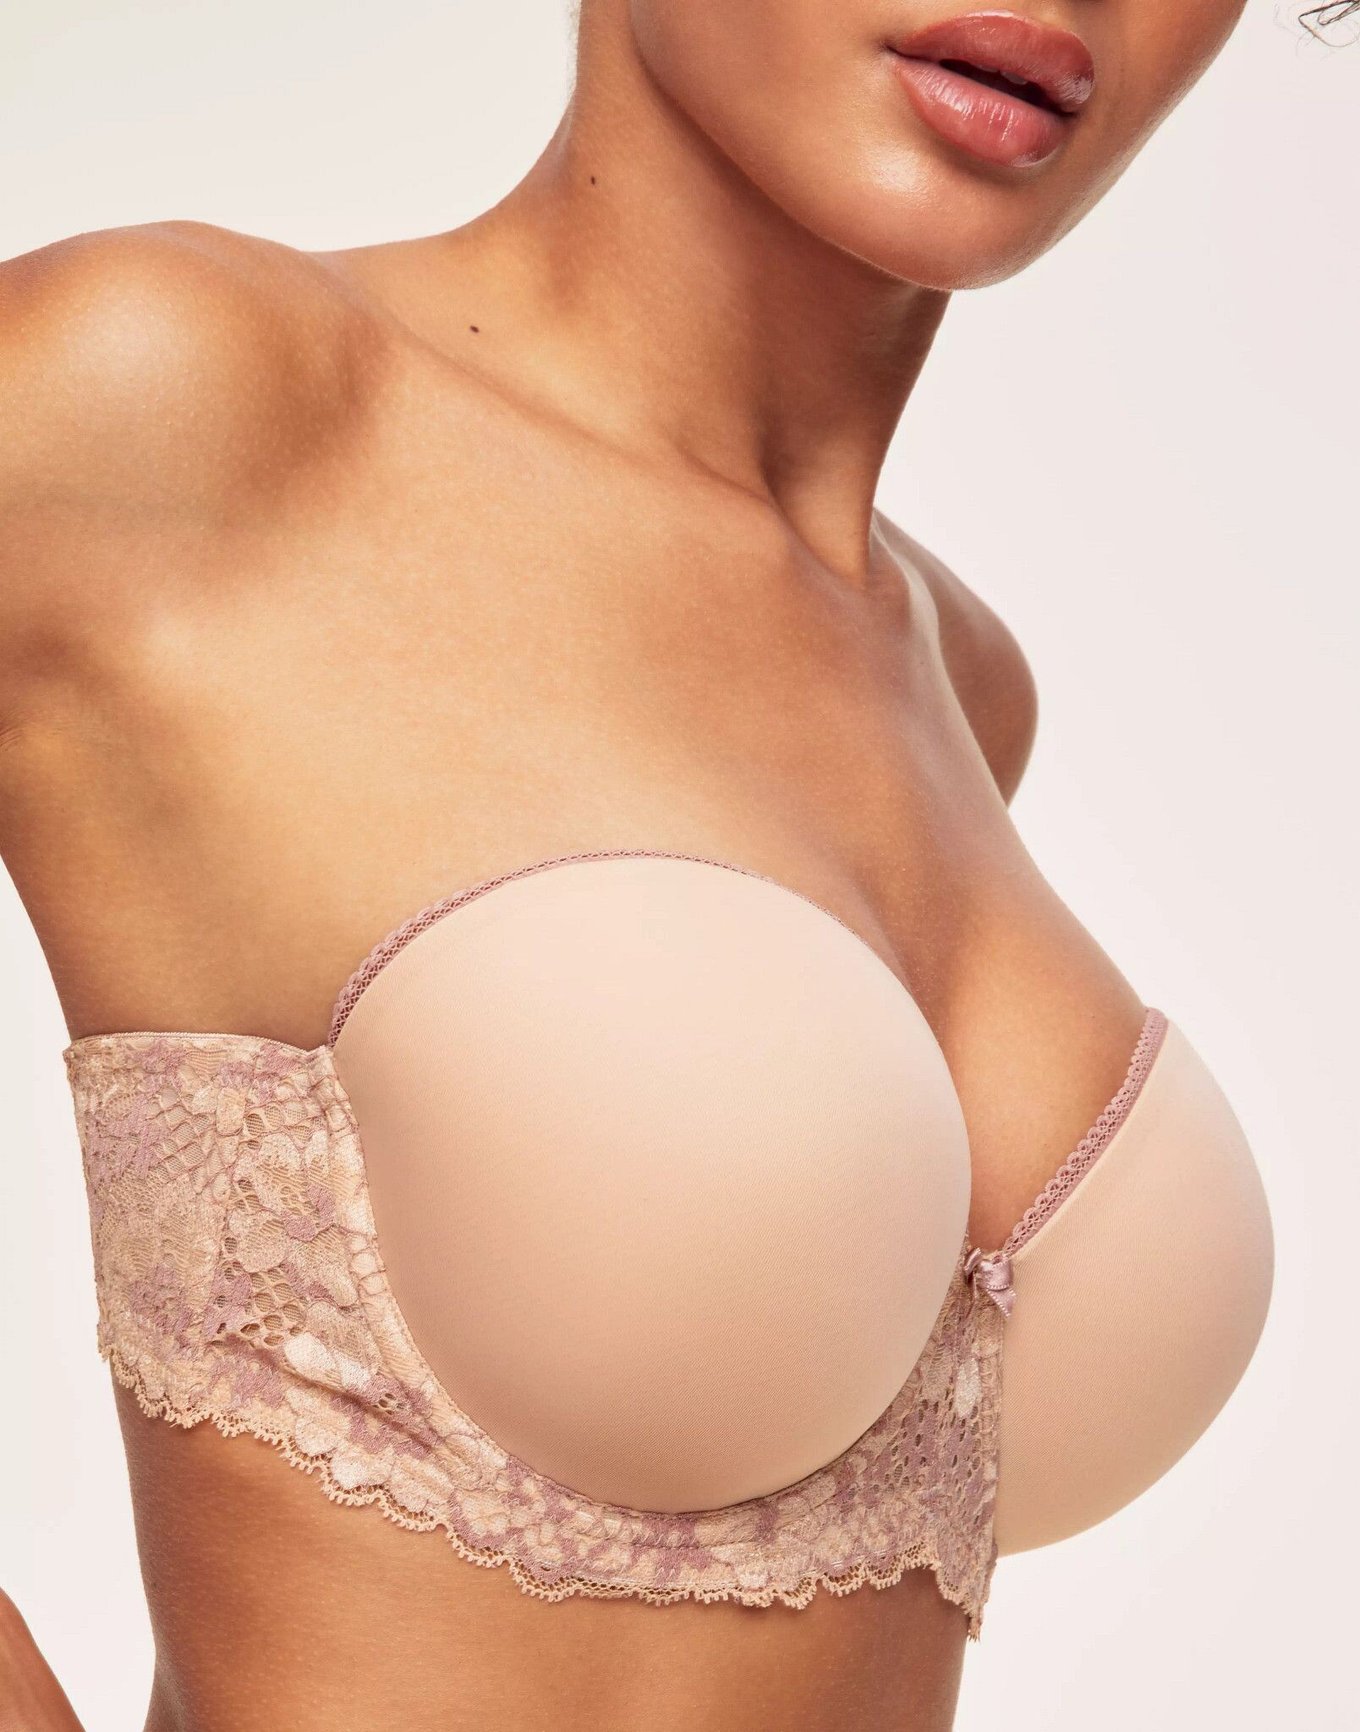 Jul 18, 2022 · Best Bra for Small Breasts For Sexy Time. Simone